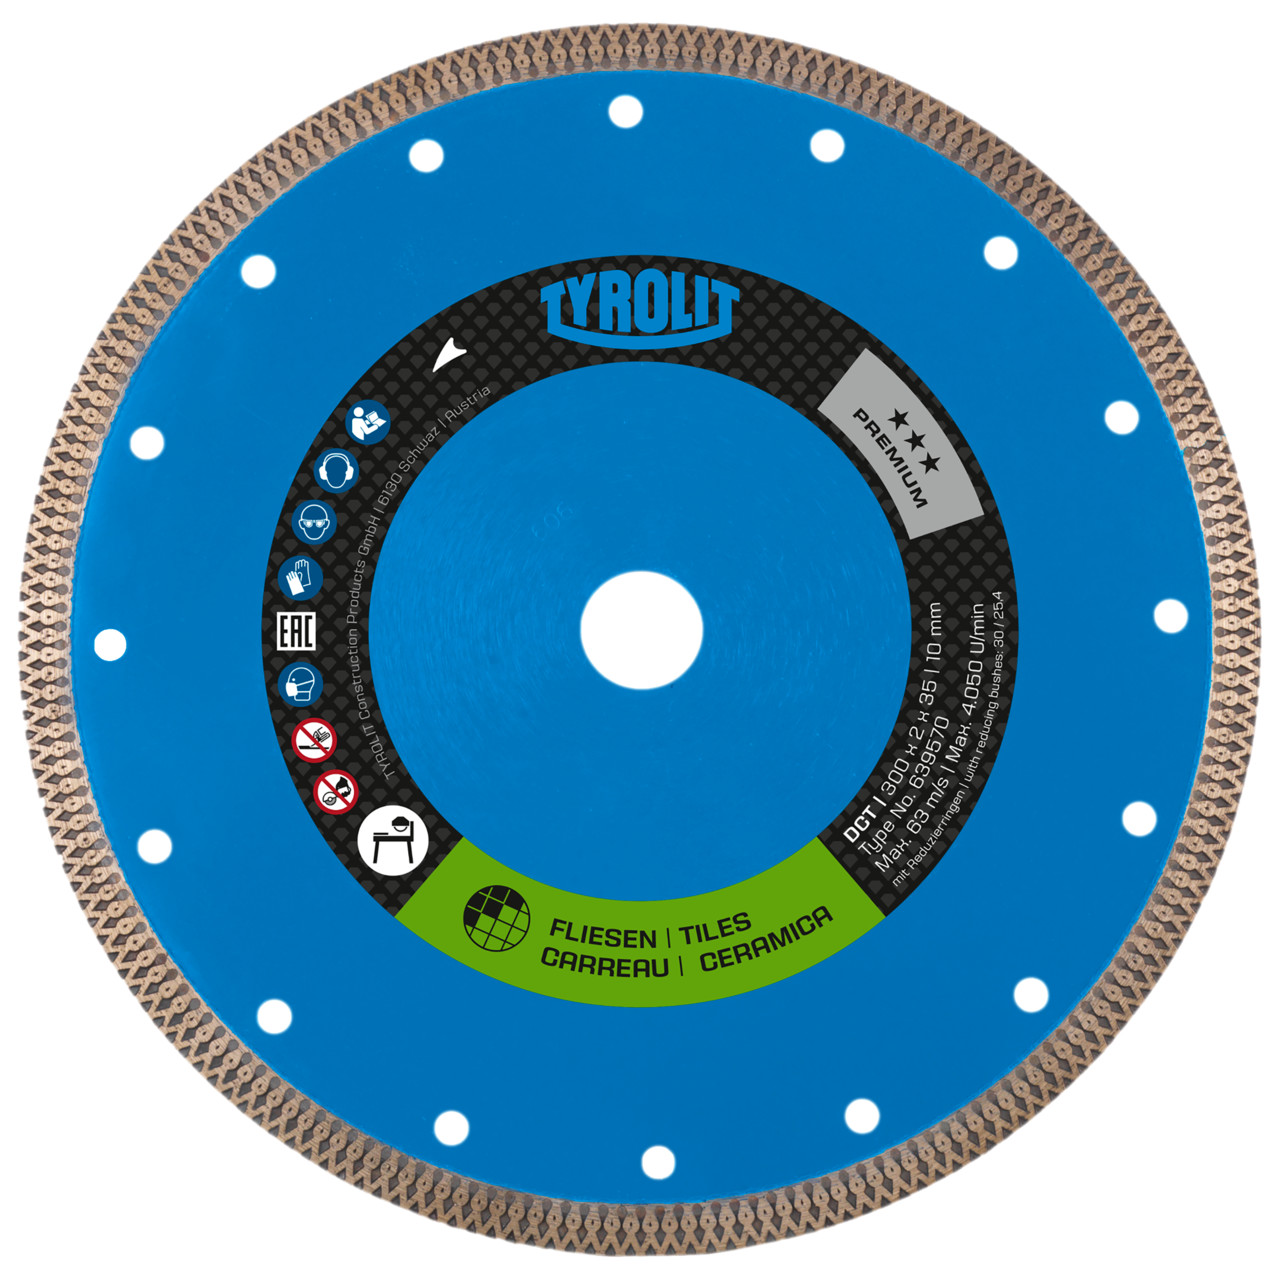 TYROLIT table saw blade DxDxH 180x1.4x35 DCT, shape: 1A1R (cut-off wheel with continuous cutting wheel), Art. 639566